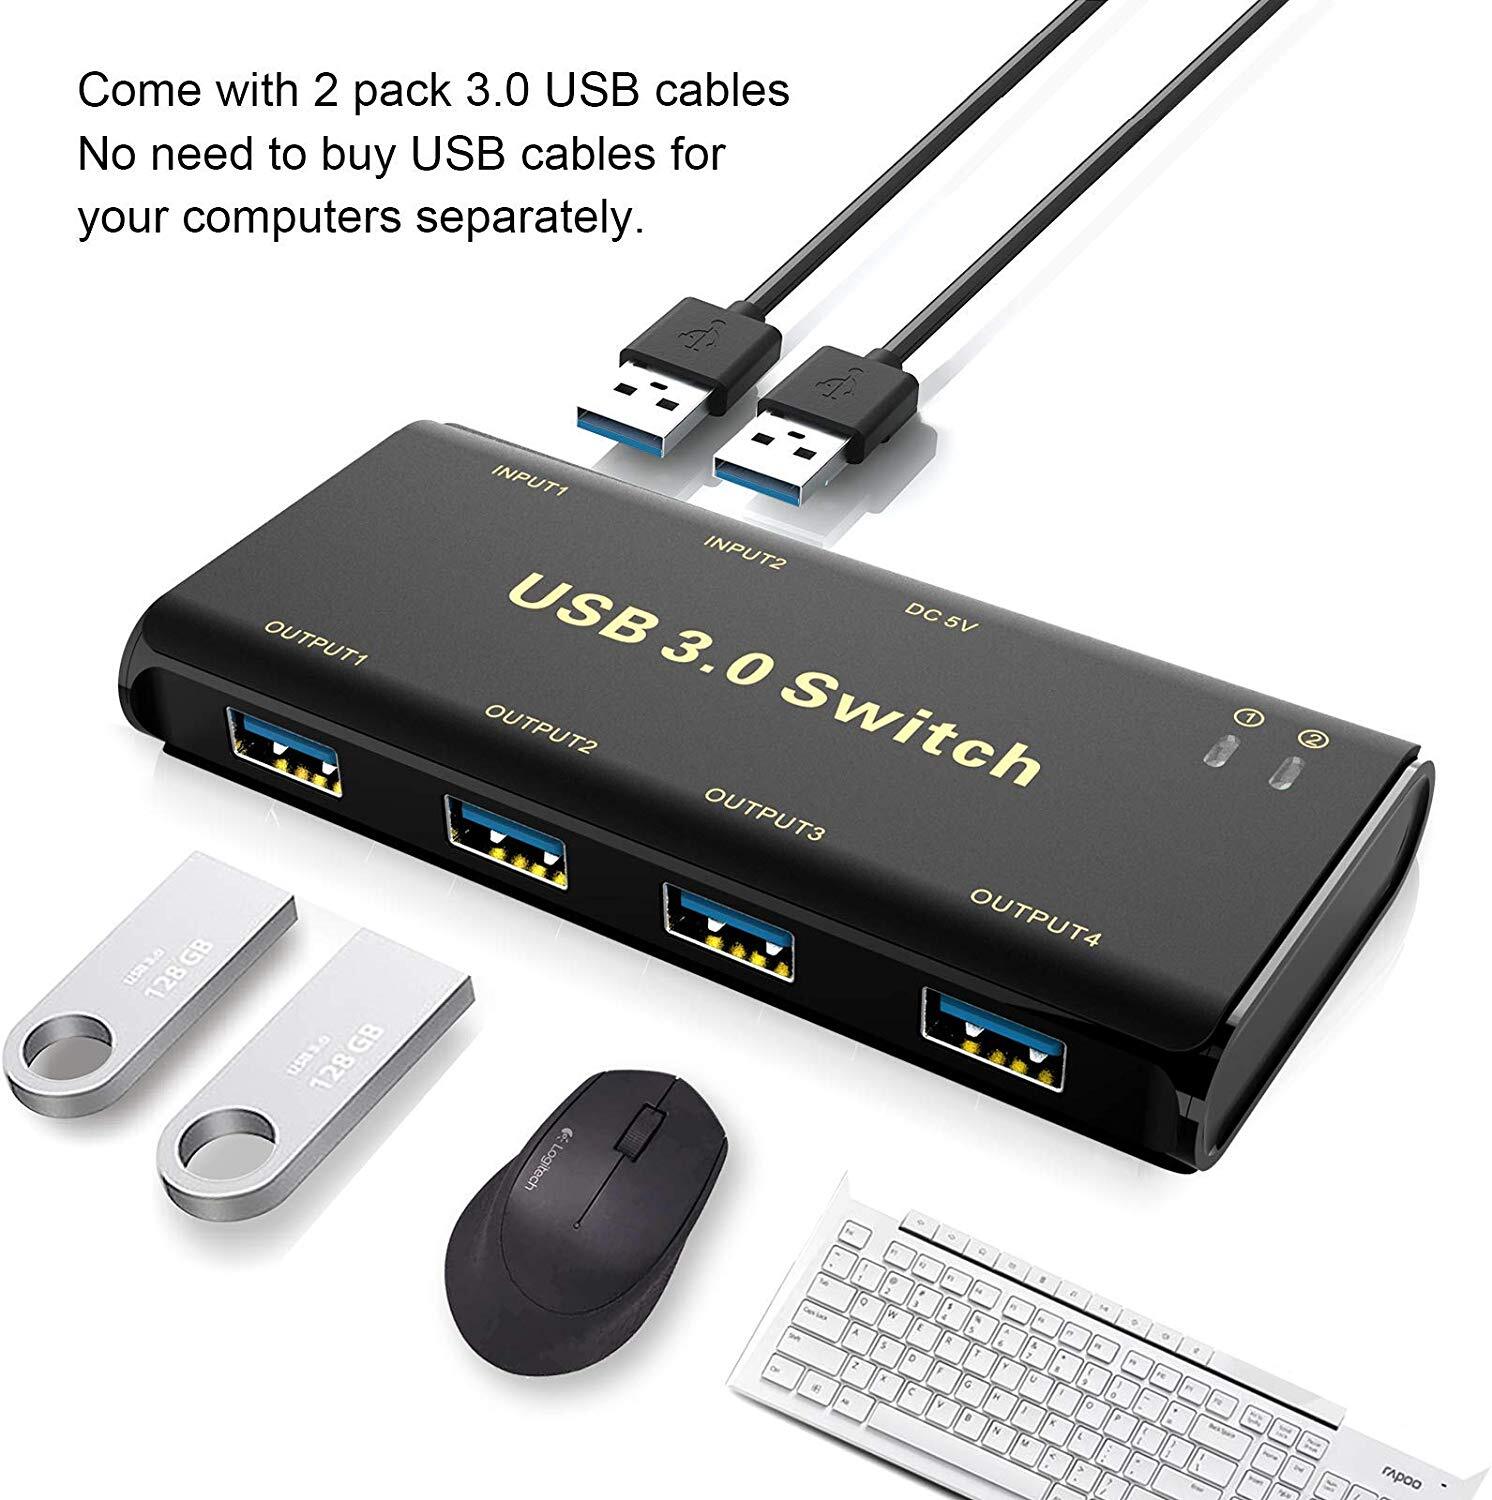 USB 3.0 Switch Selector,ABLEWE KVM Switcher Adapter 4 Port USB Peripheral  Switcher Box Hub for Mouse, Keyboard, Scanner, Printer, PCs with One-Button  Switch and 2 Pack USB Cable